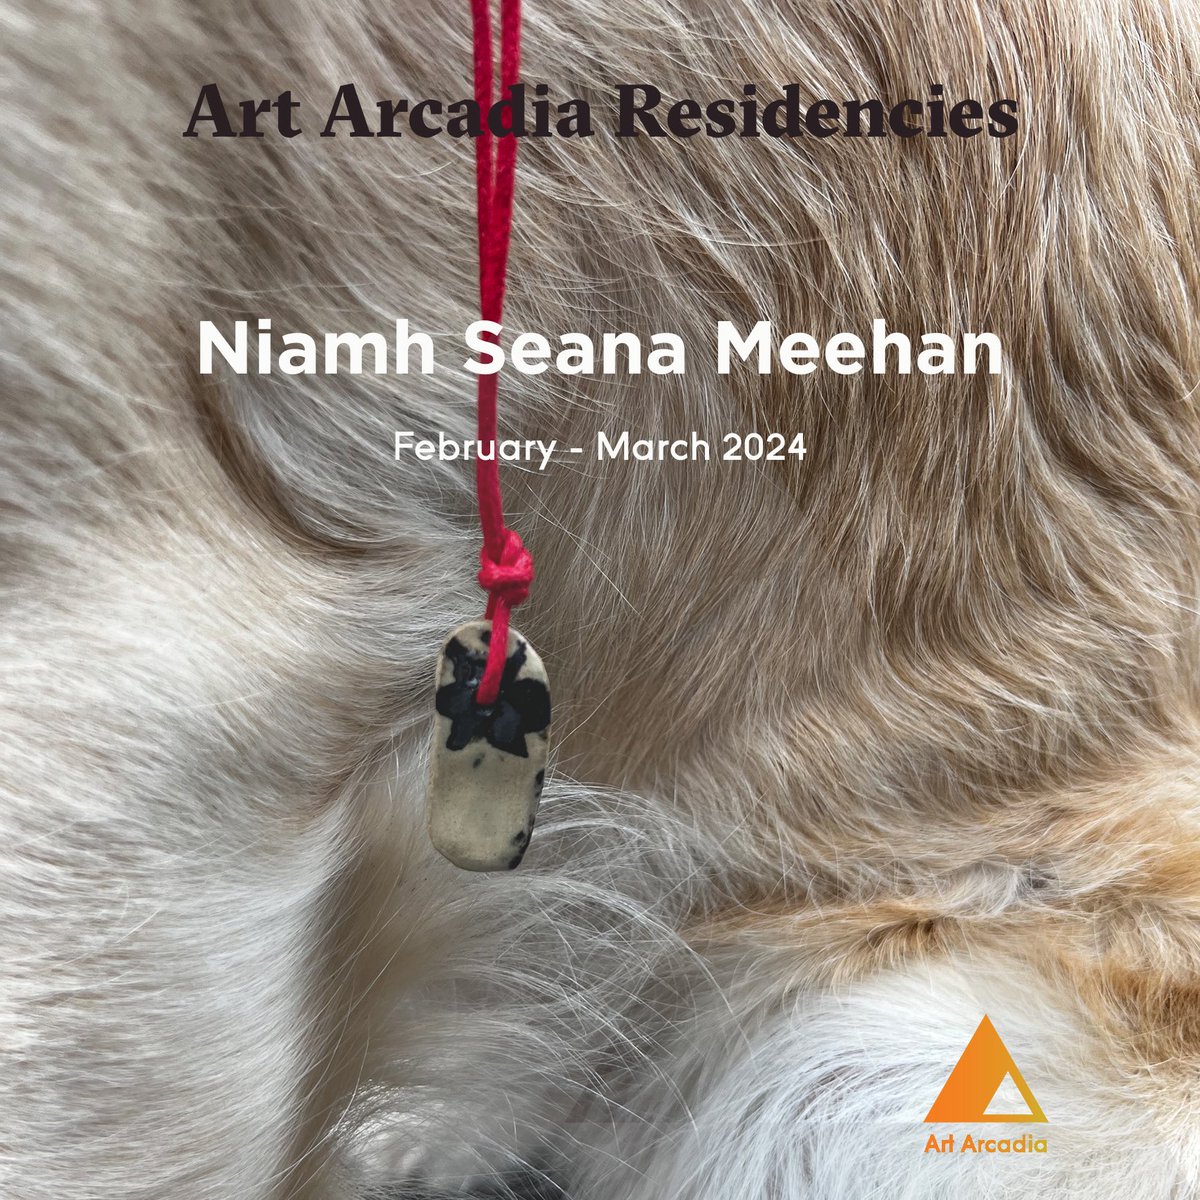 A big warm welcome to Niamh Seana Meehan our resident artist for February and March!
#artarcadia #artscouncilni #DCSDC #whatsonds #artistresidency #niamhseanameehan #ACNISupported #NationalLottery #ThanksToYou #artansm33 @niamhseanameehan @paola.bee @LottoGoodCauses